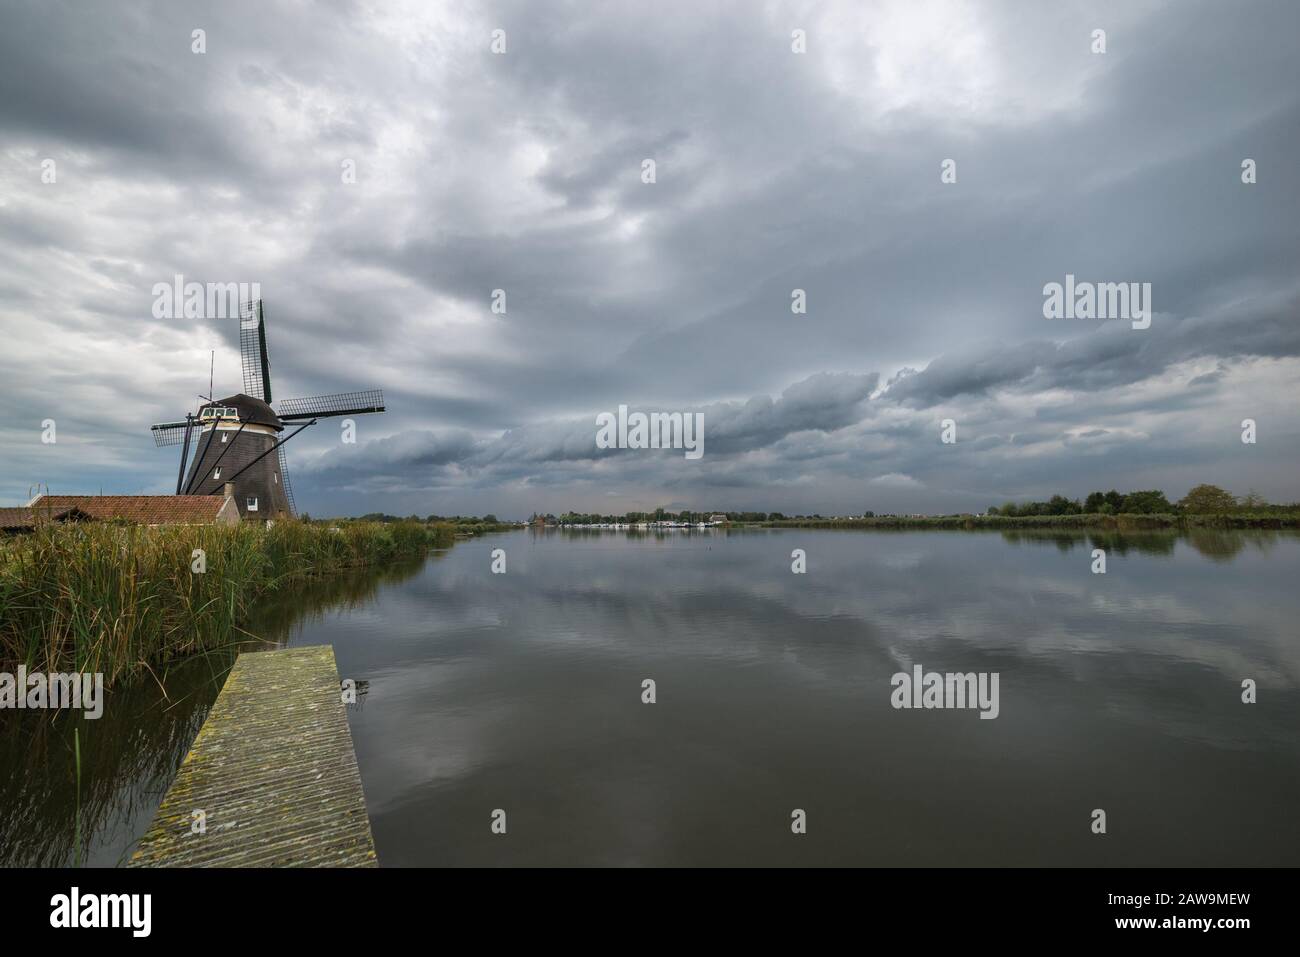 Shelf cloud of a thunderstorm over the river RotteNetherlands. Scenic landscape image with classic dutch windmill and calm water before the storm. Stock Photo